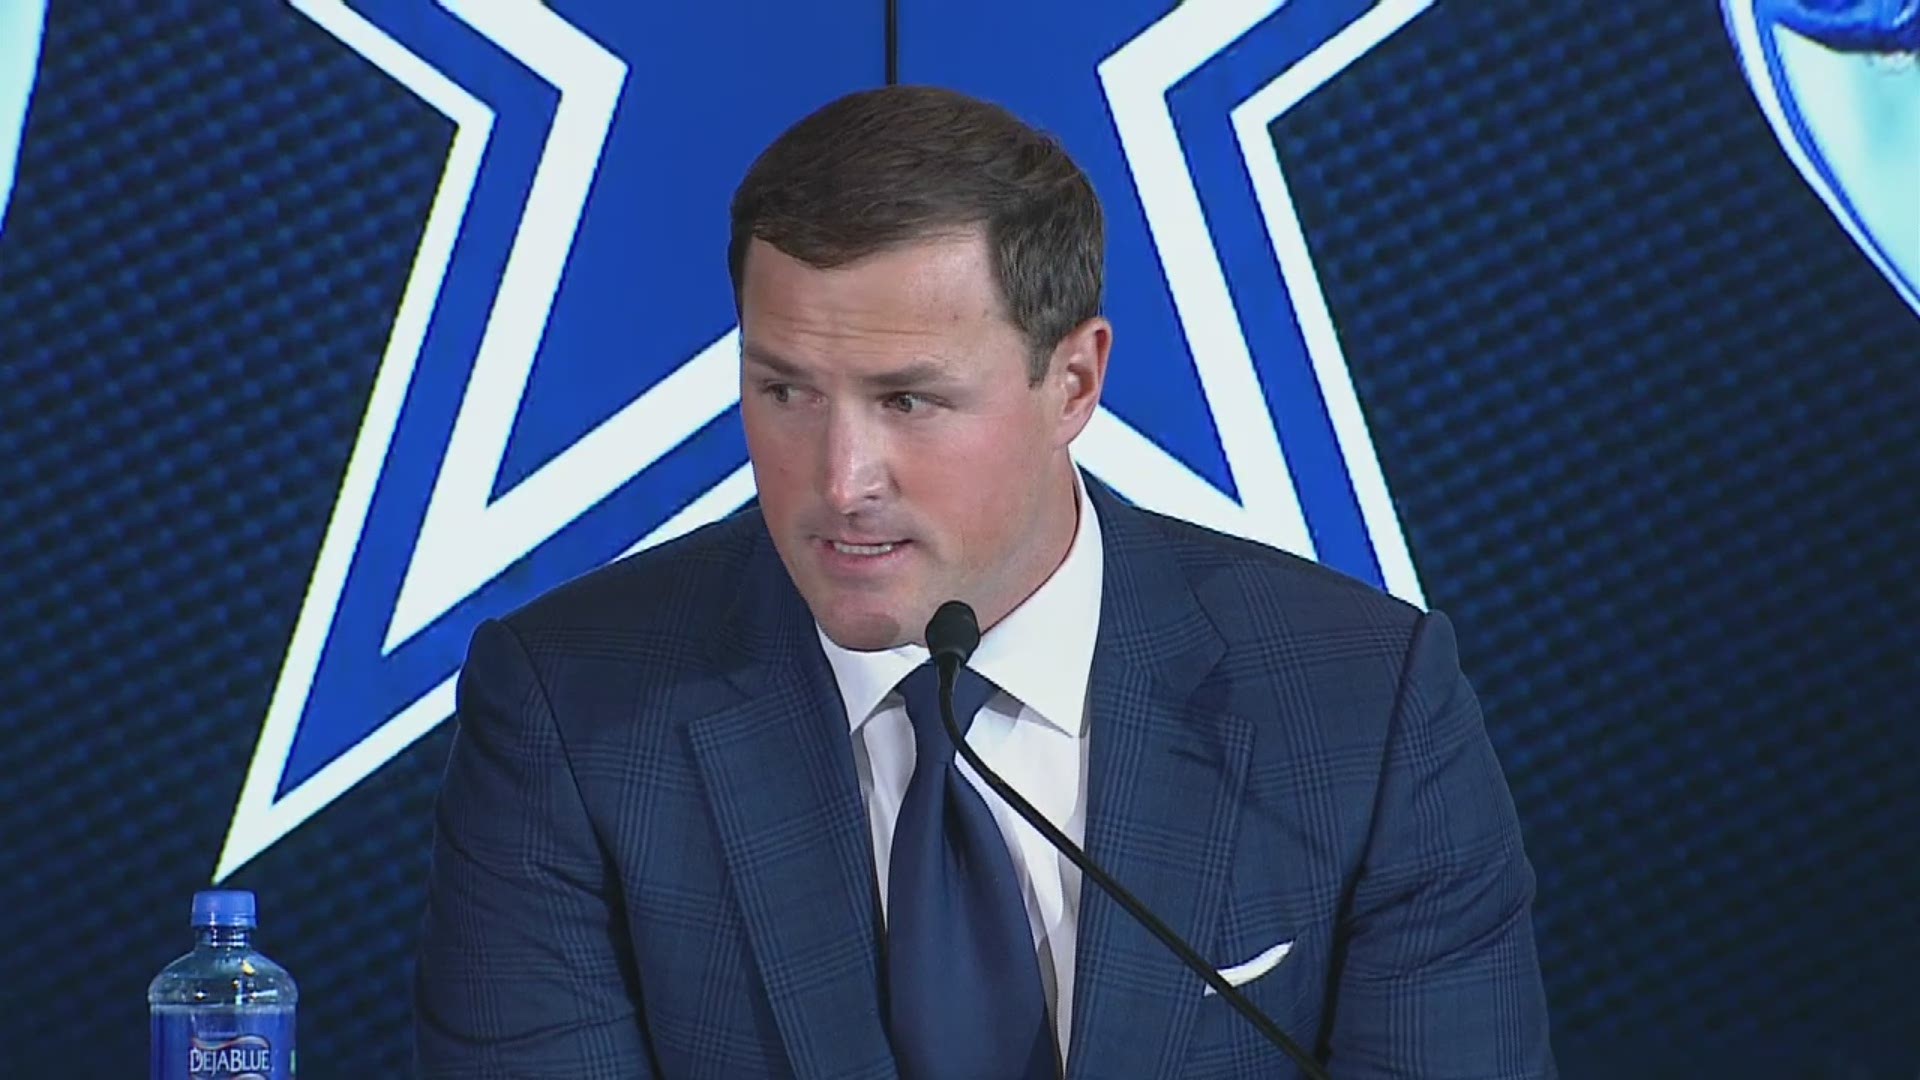 Jason Witten officially announces his retirement from professional football at The Star in Frisco. WFAA